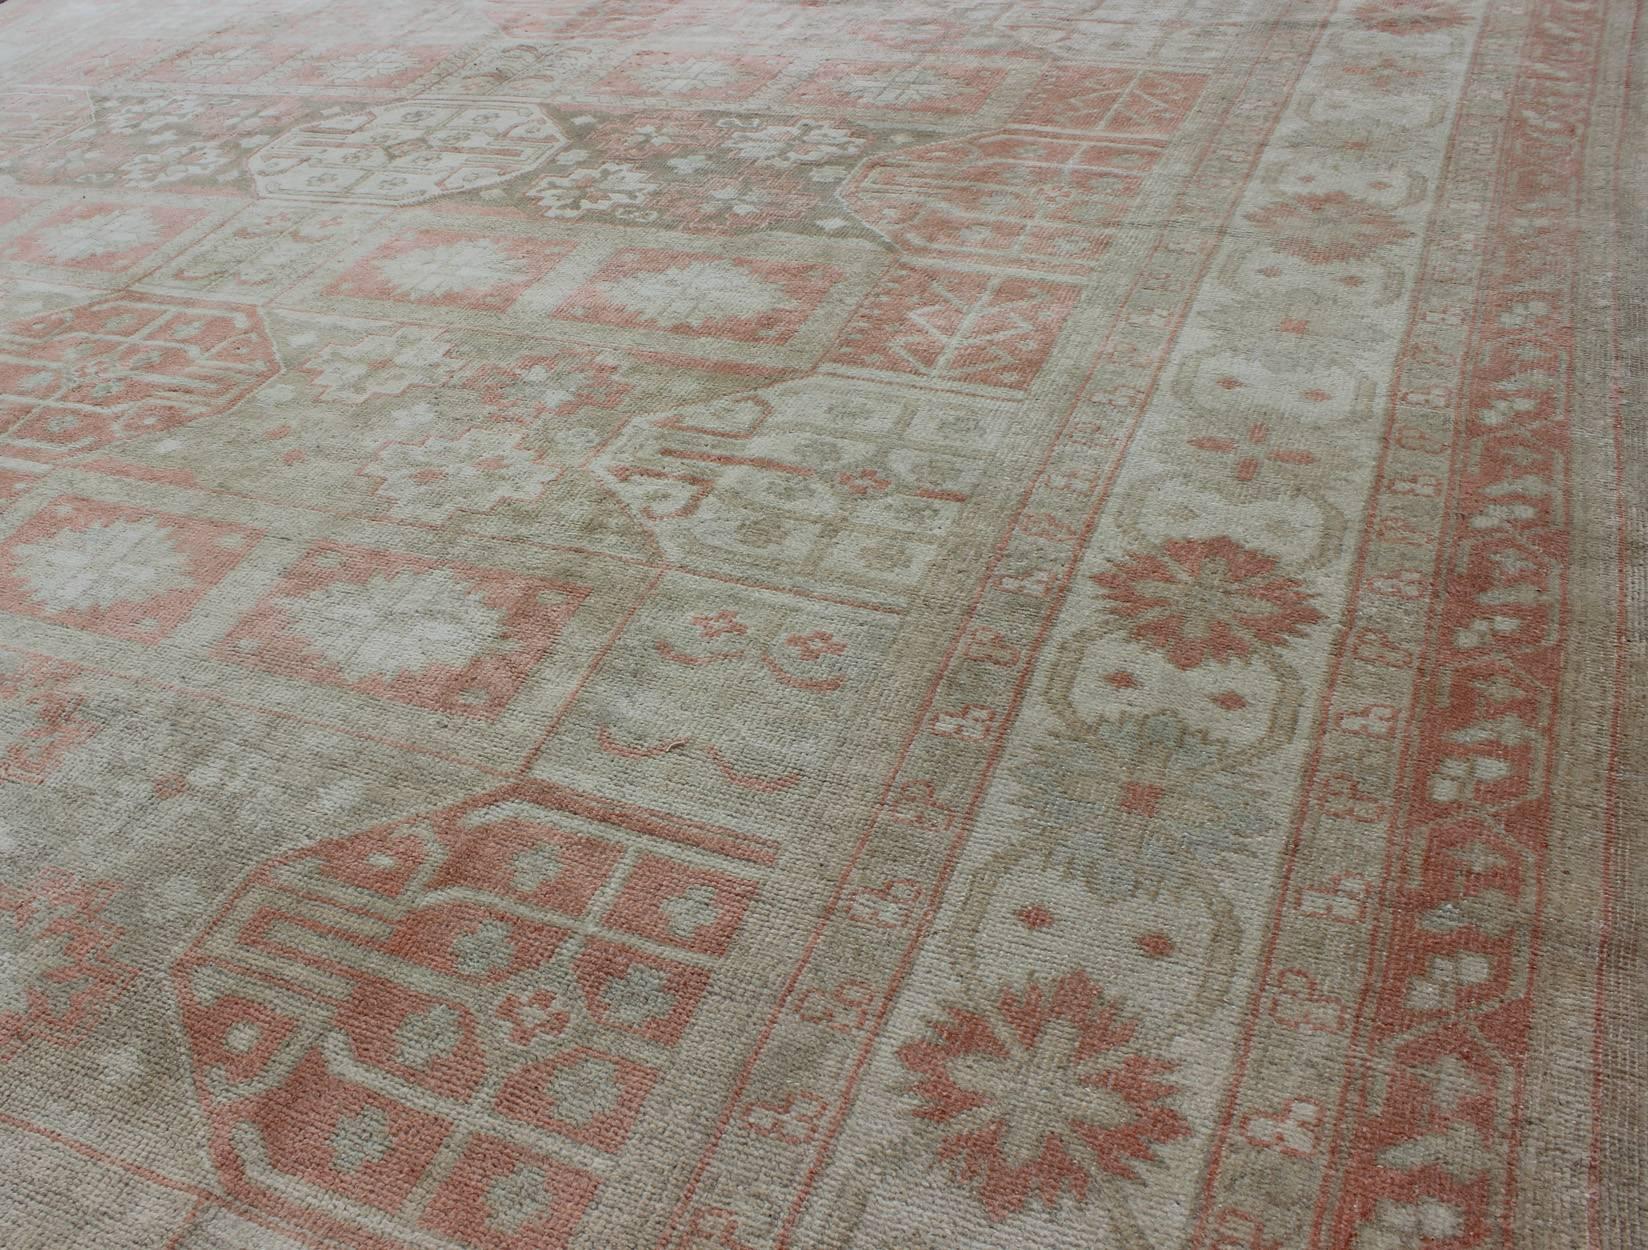 Vintage Khotan Design Rug with Sub-Geometric Grid Design and Detailed Borders In Excellent Condition For Sale In Atlanta, GA